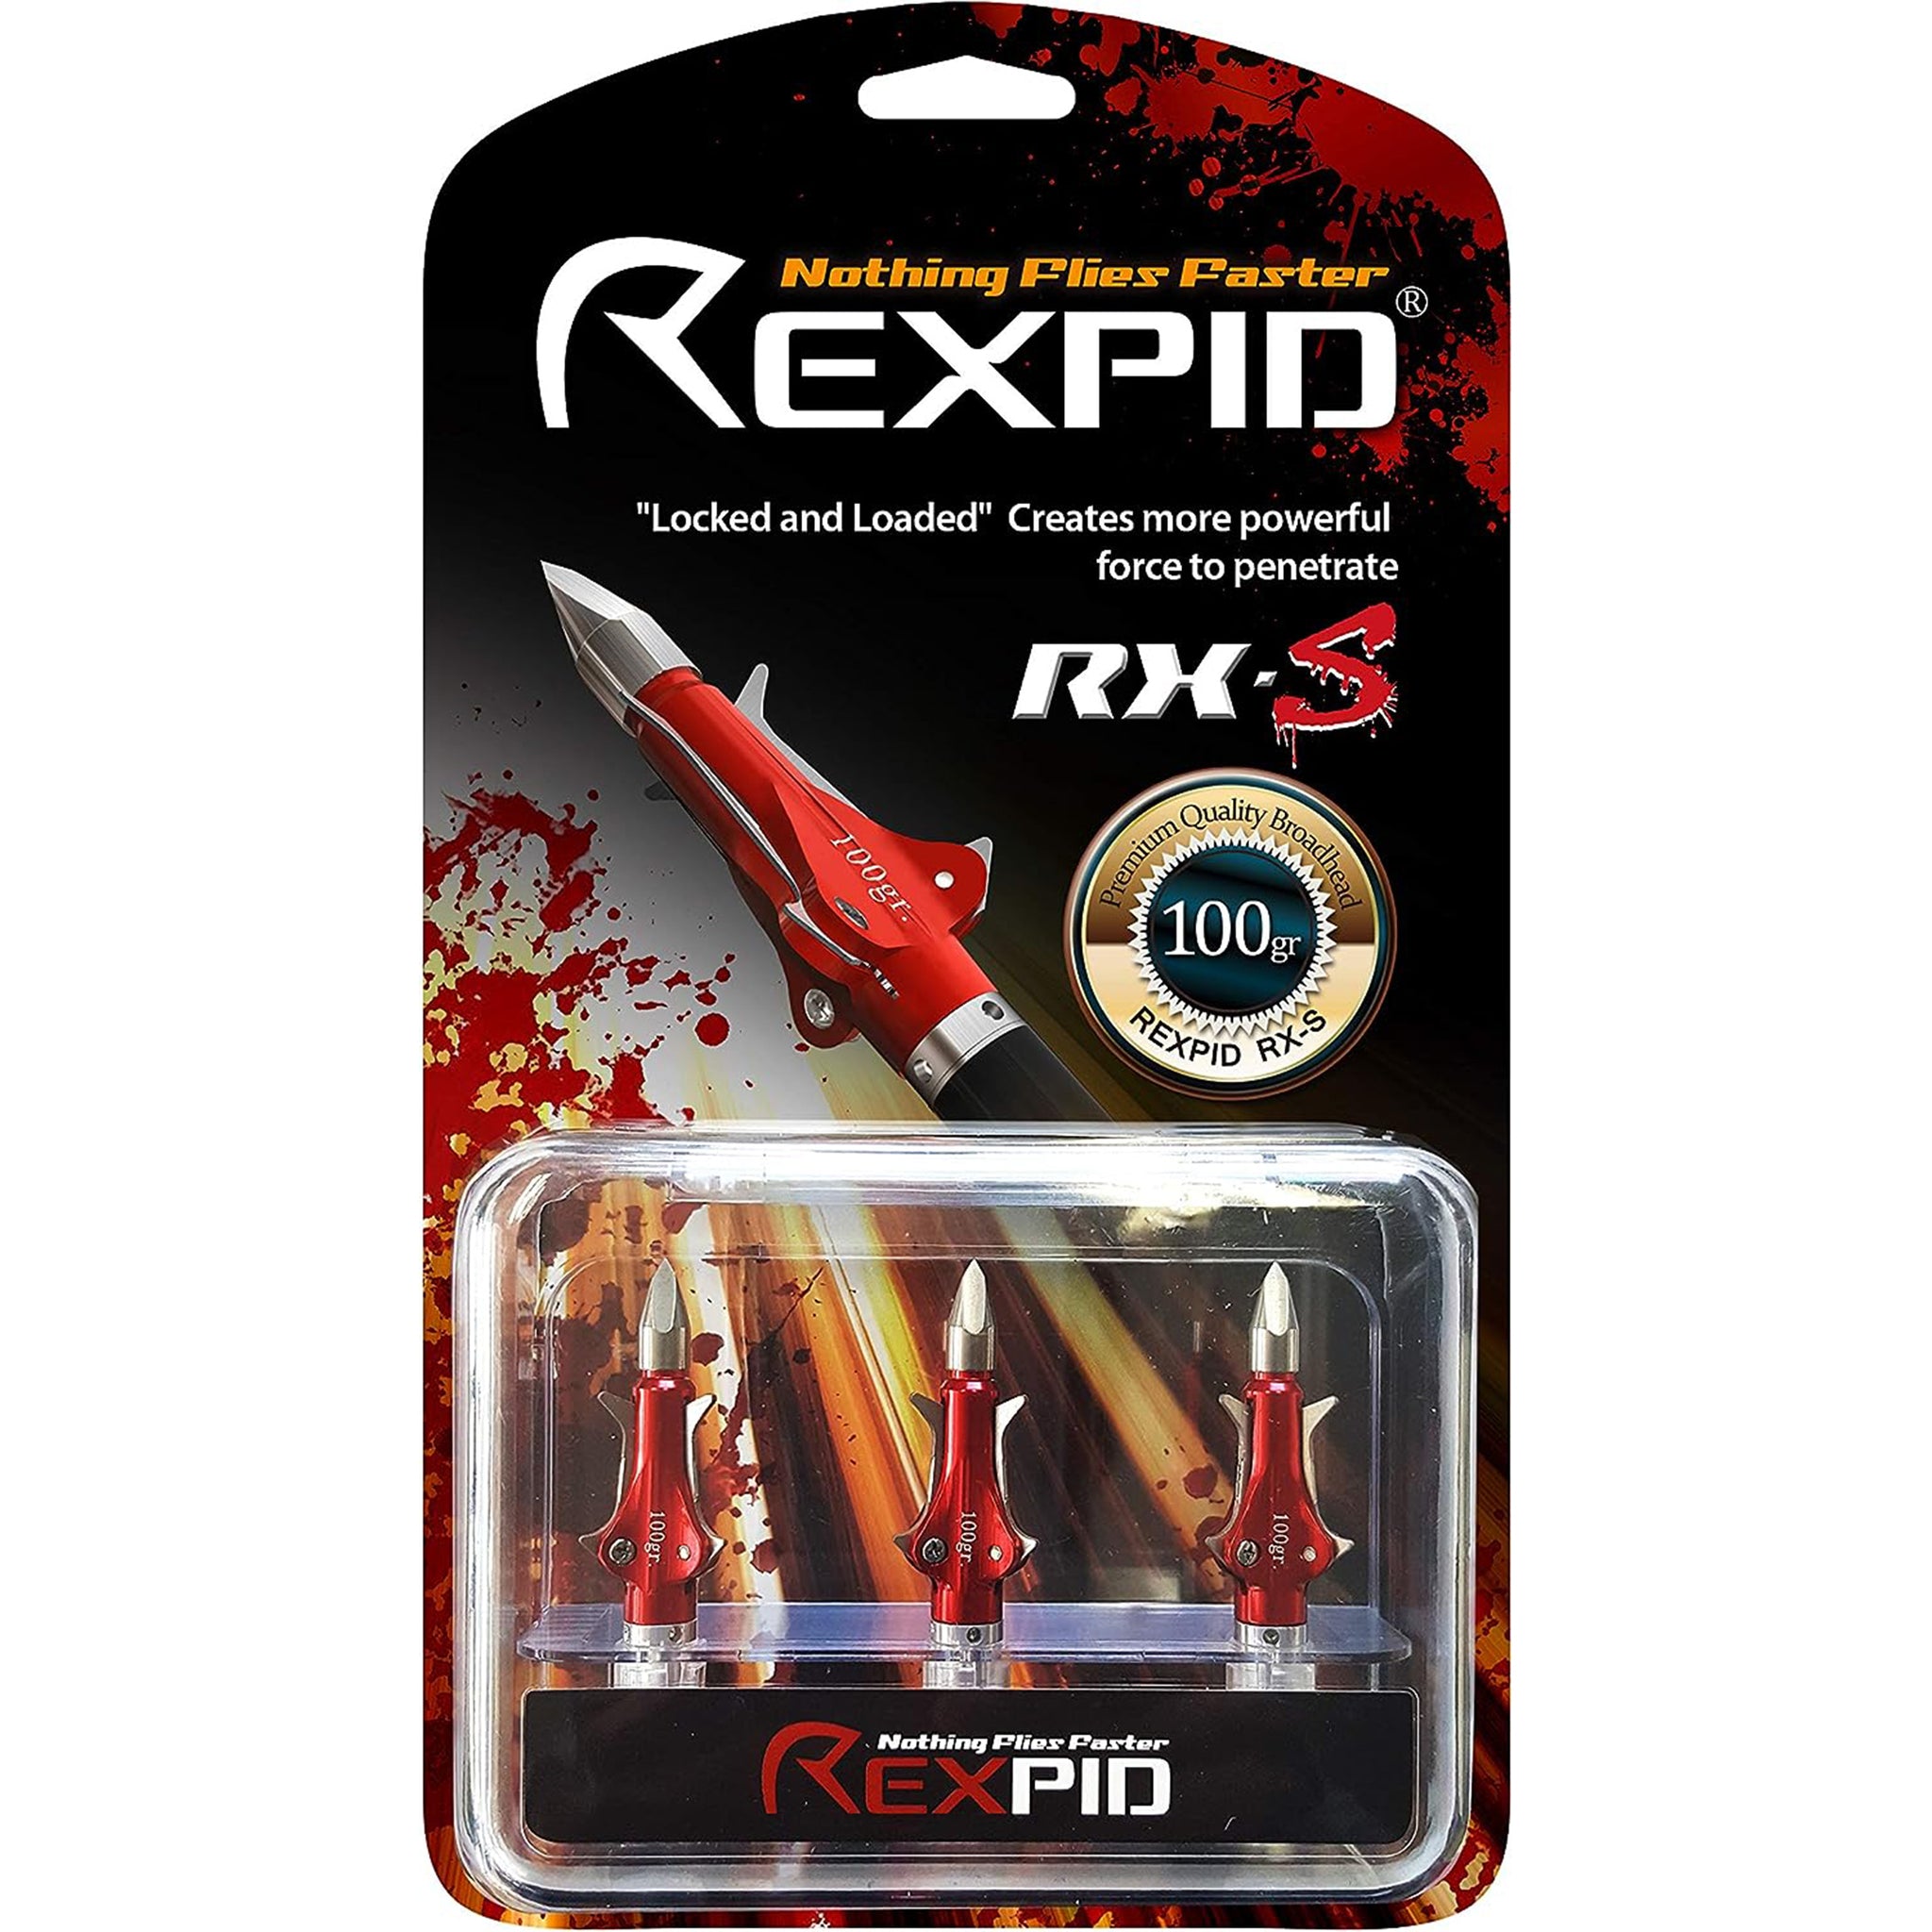 RX-S - Mechanical Broadheads For Crossbow Hunting - 3 Locked & Loaded Blades - Opens On Impact - Powerful Penetrating Force - 1½˝ Cutting Diameter - 0.035" Blade Thickness - 100 Grain - 3 Pack